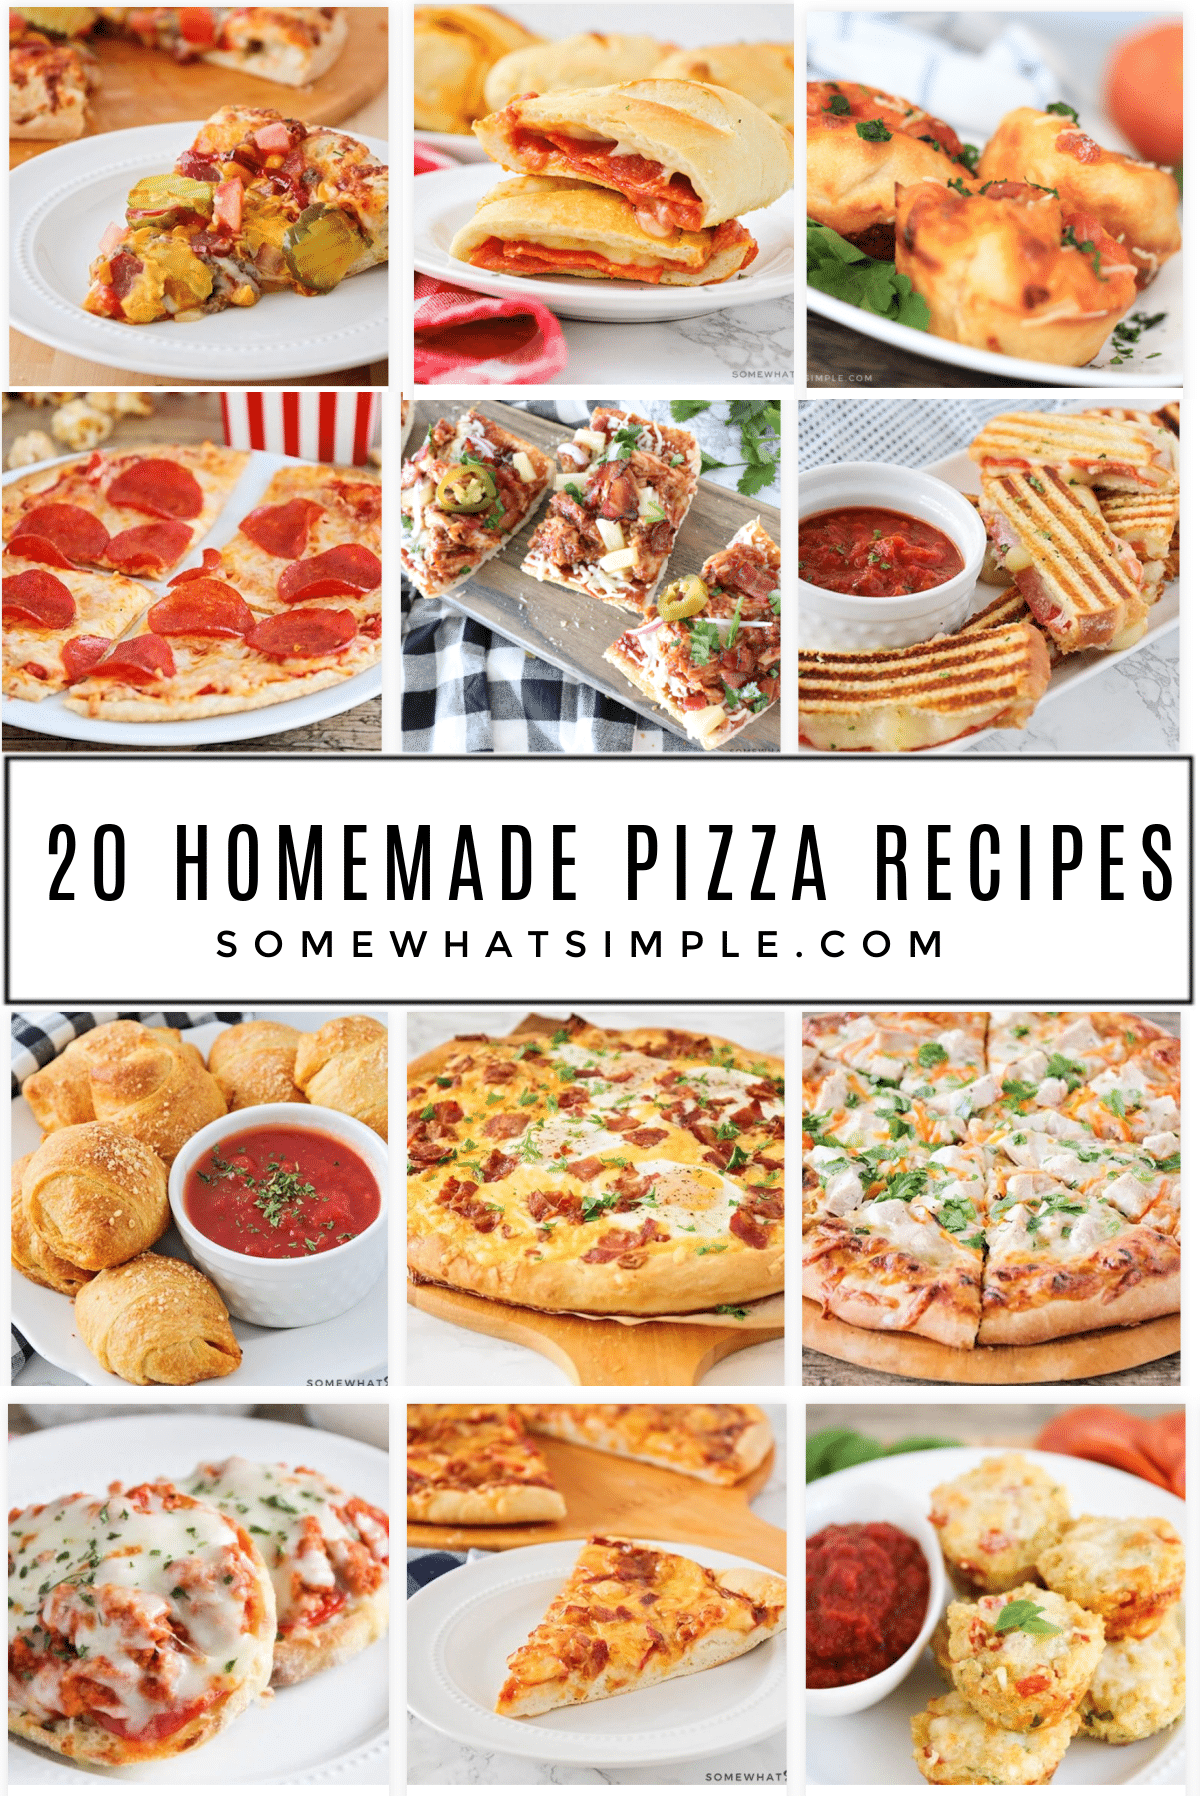 Switch up your weekly pizza night with 20 homemade pizza recipes that are fast, easy, and totally delicious! via @somewhatsimple